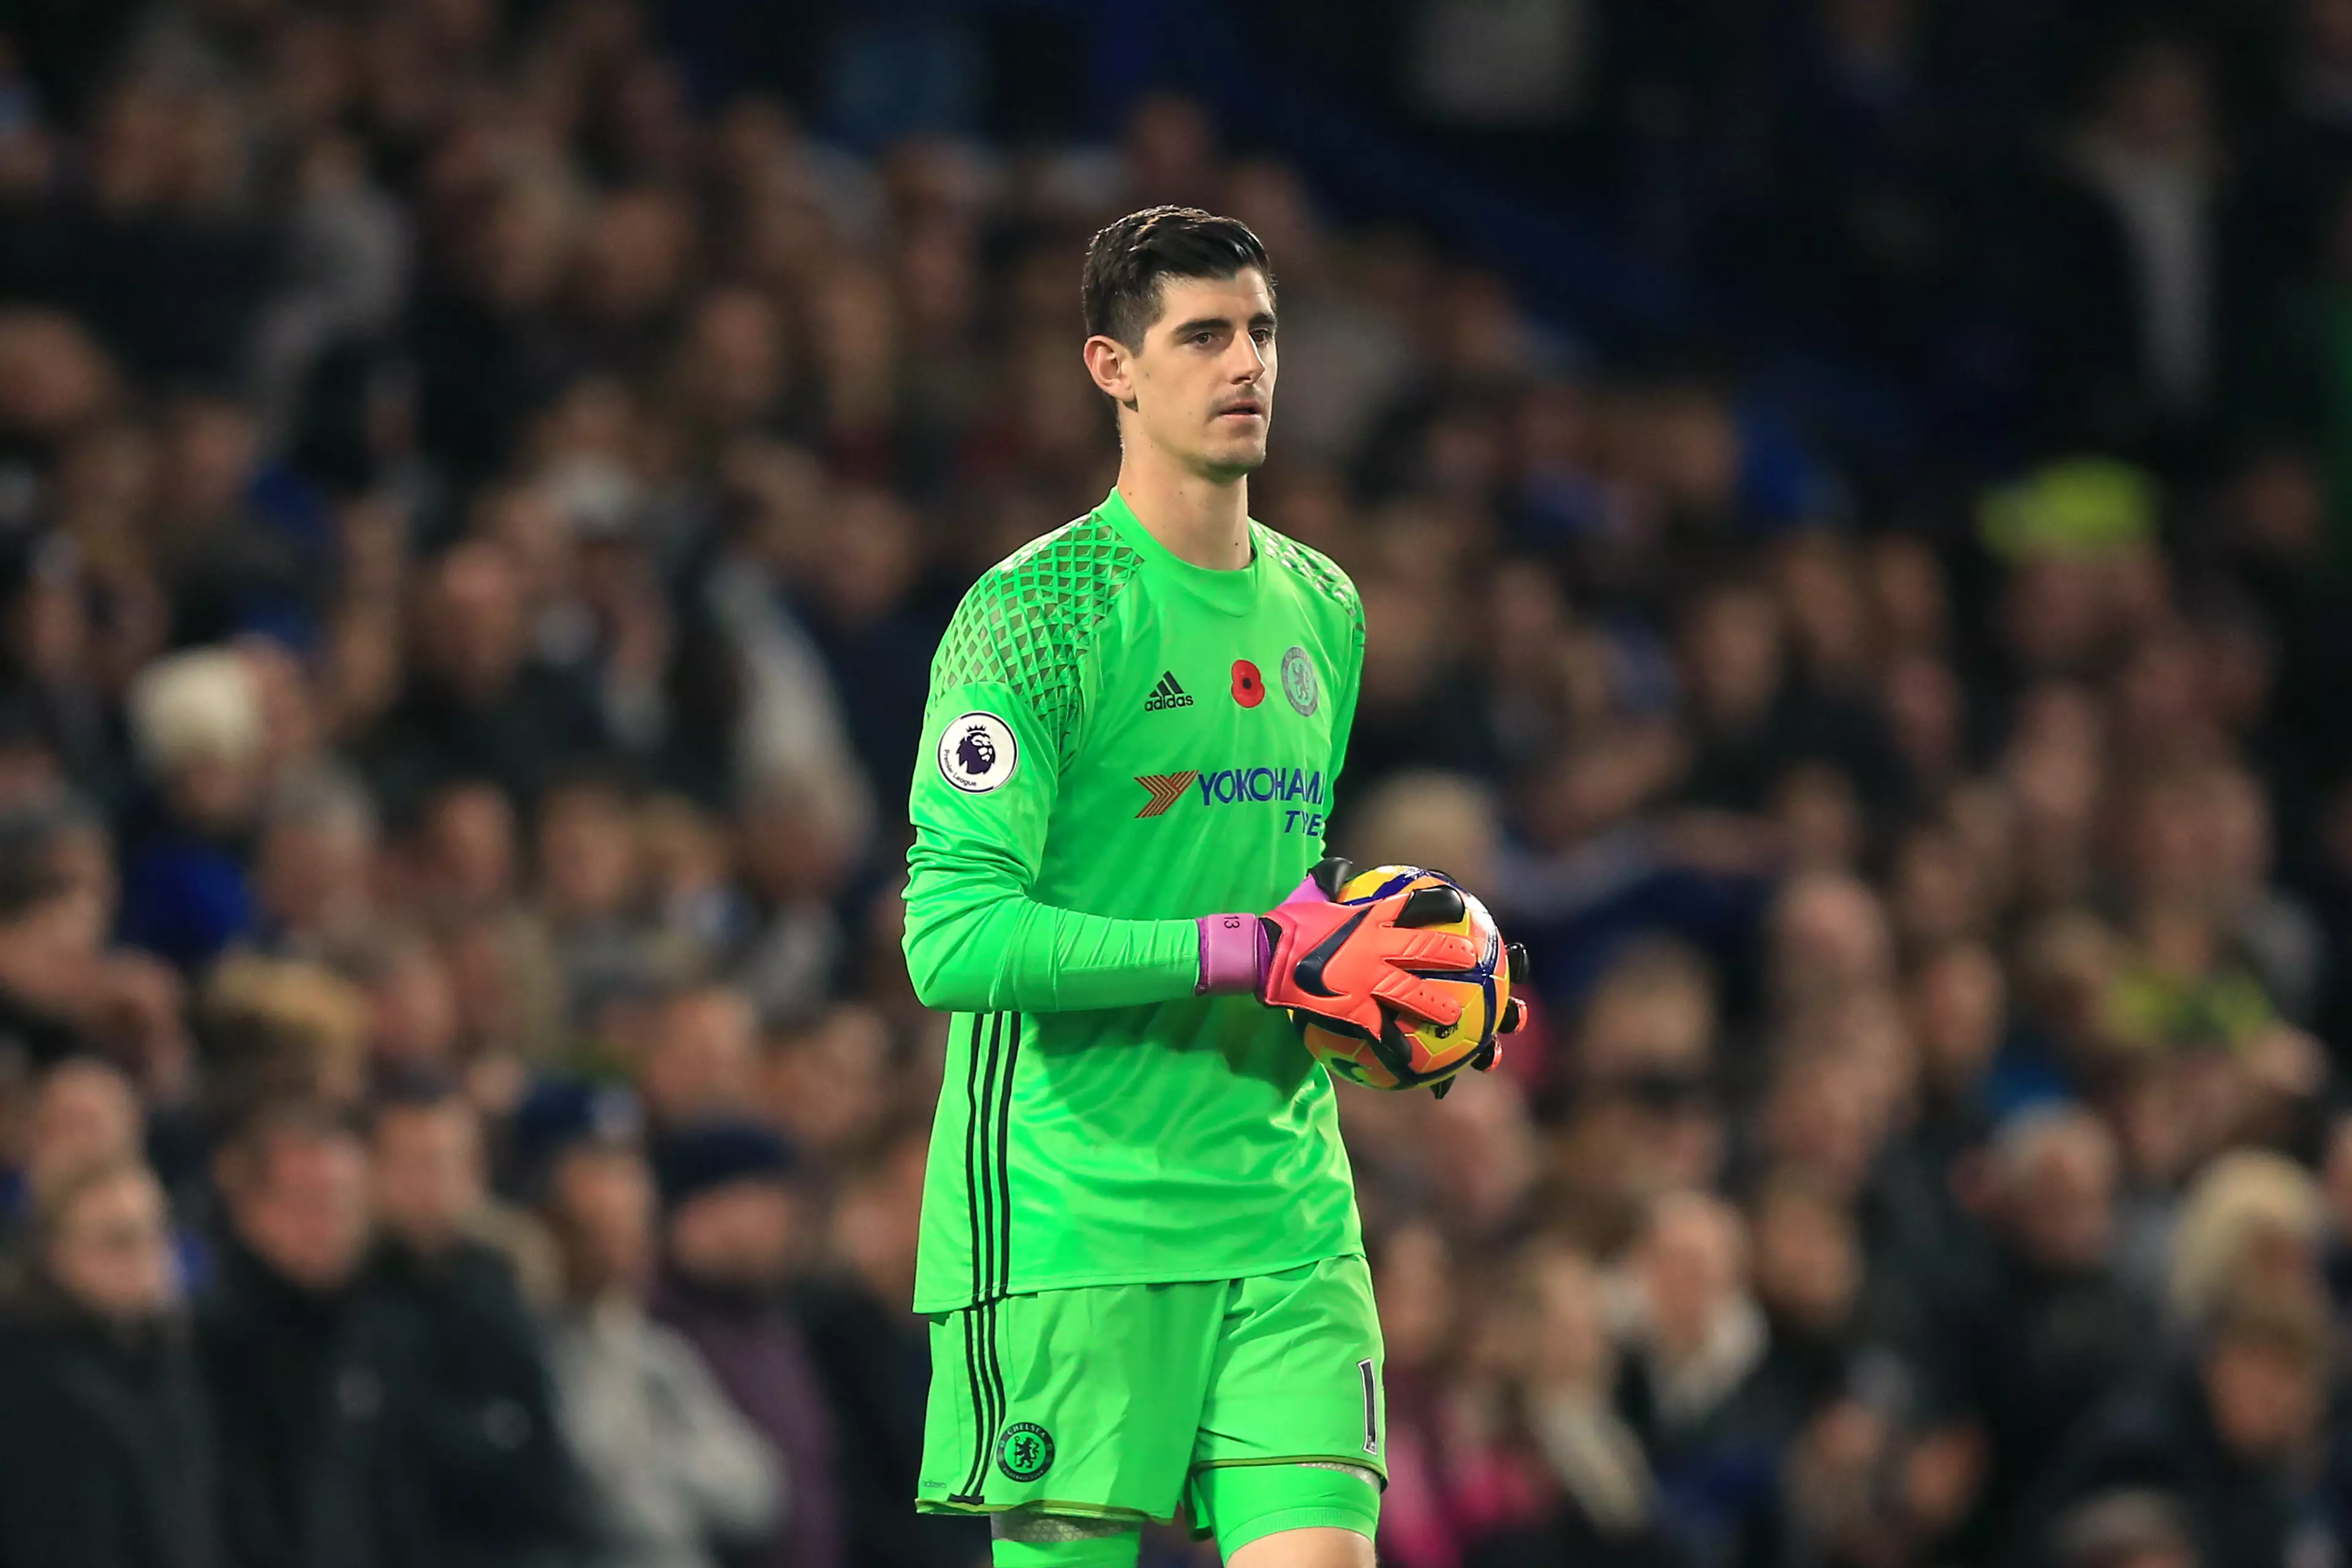 Thibaut Courtois Is Earning A Fortune Per Save, This Season